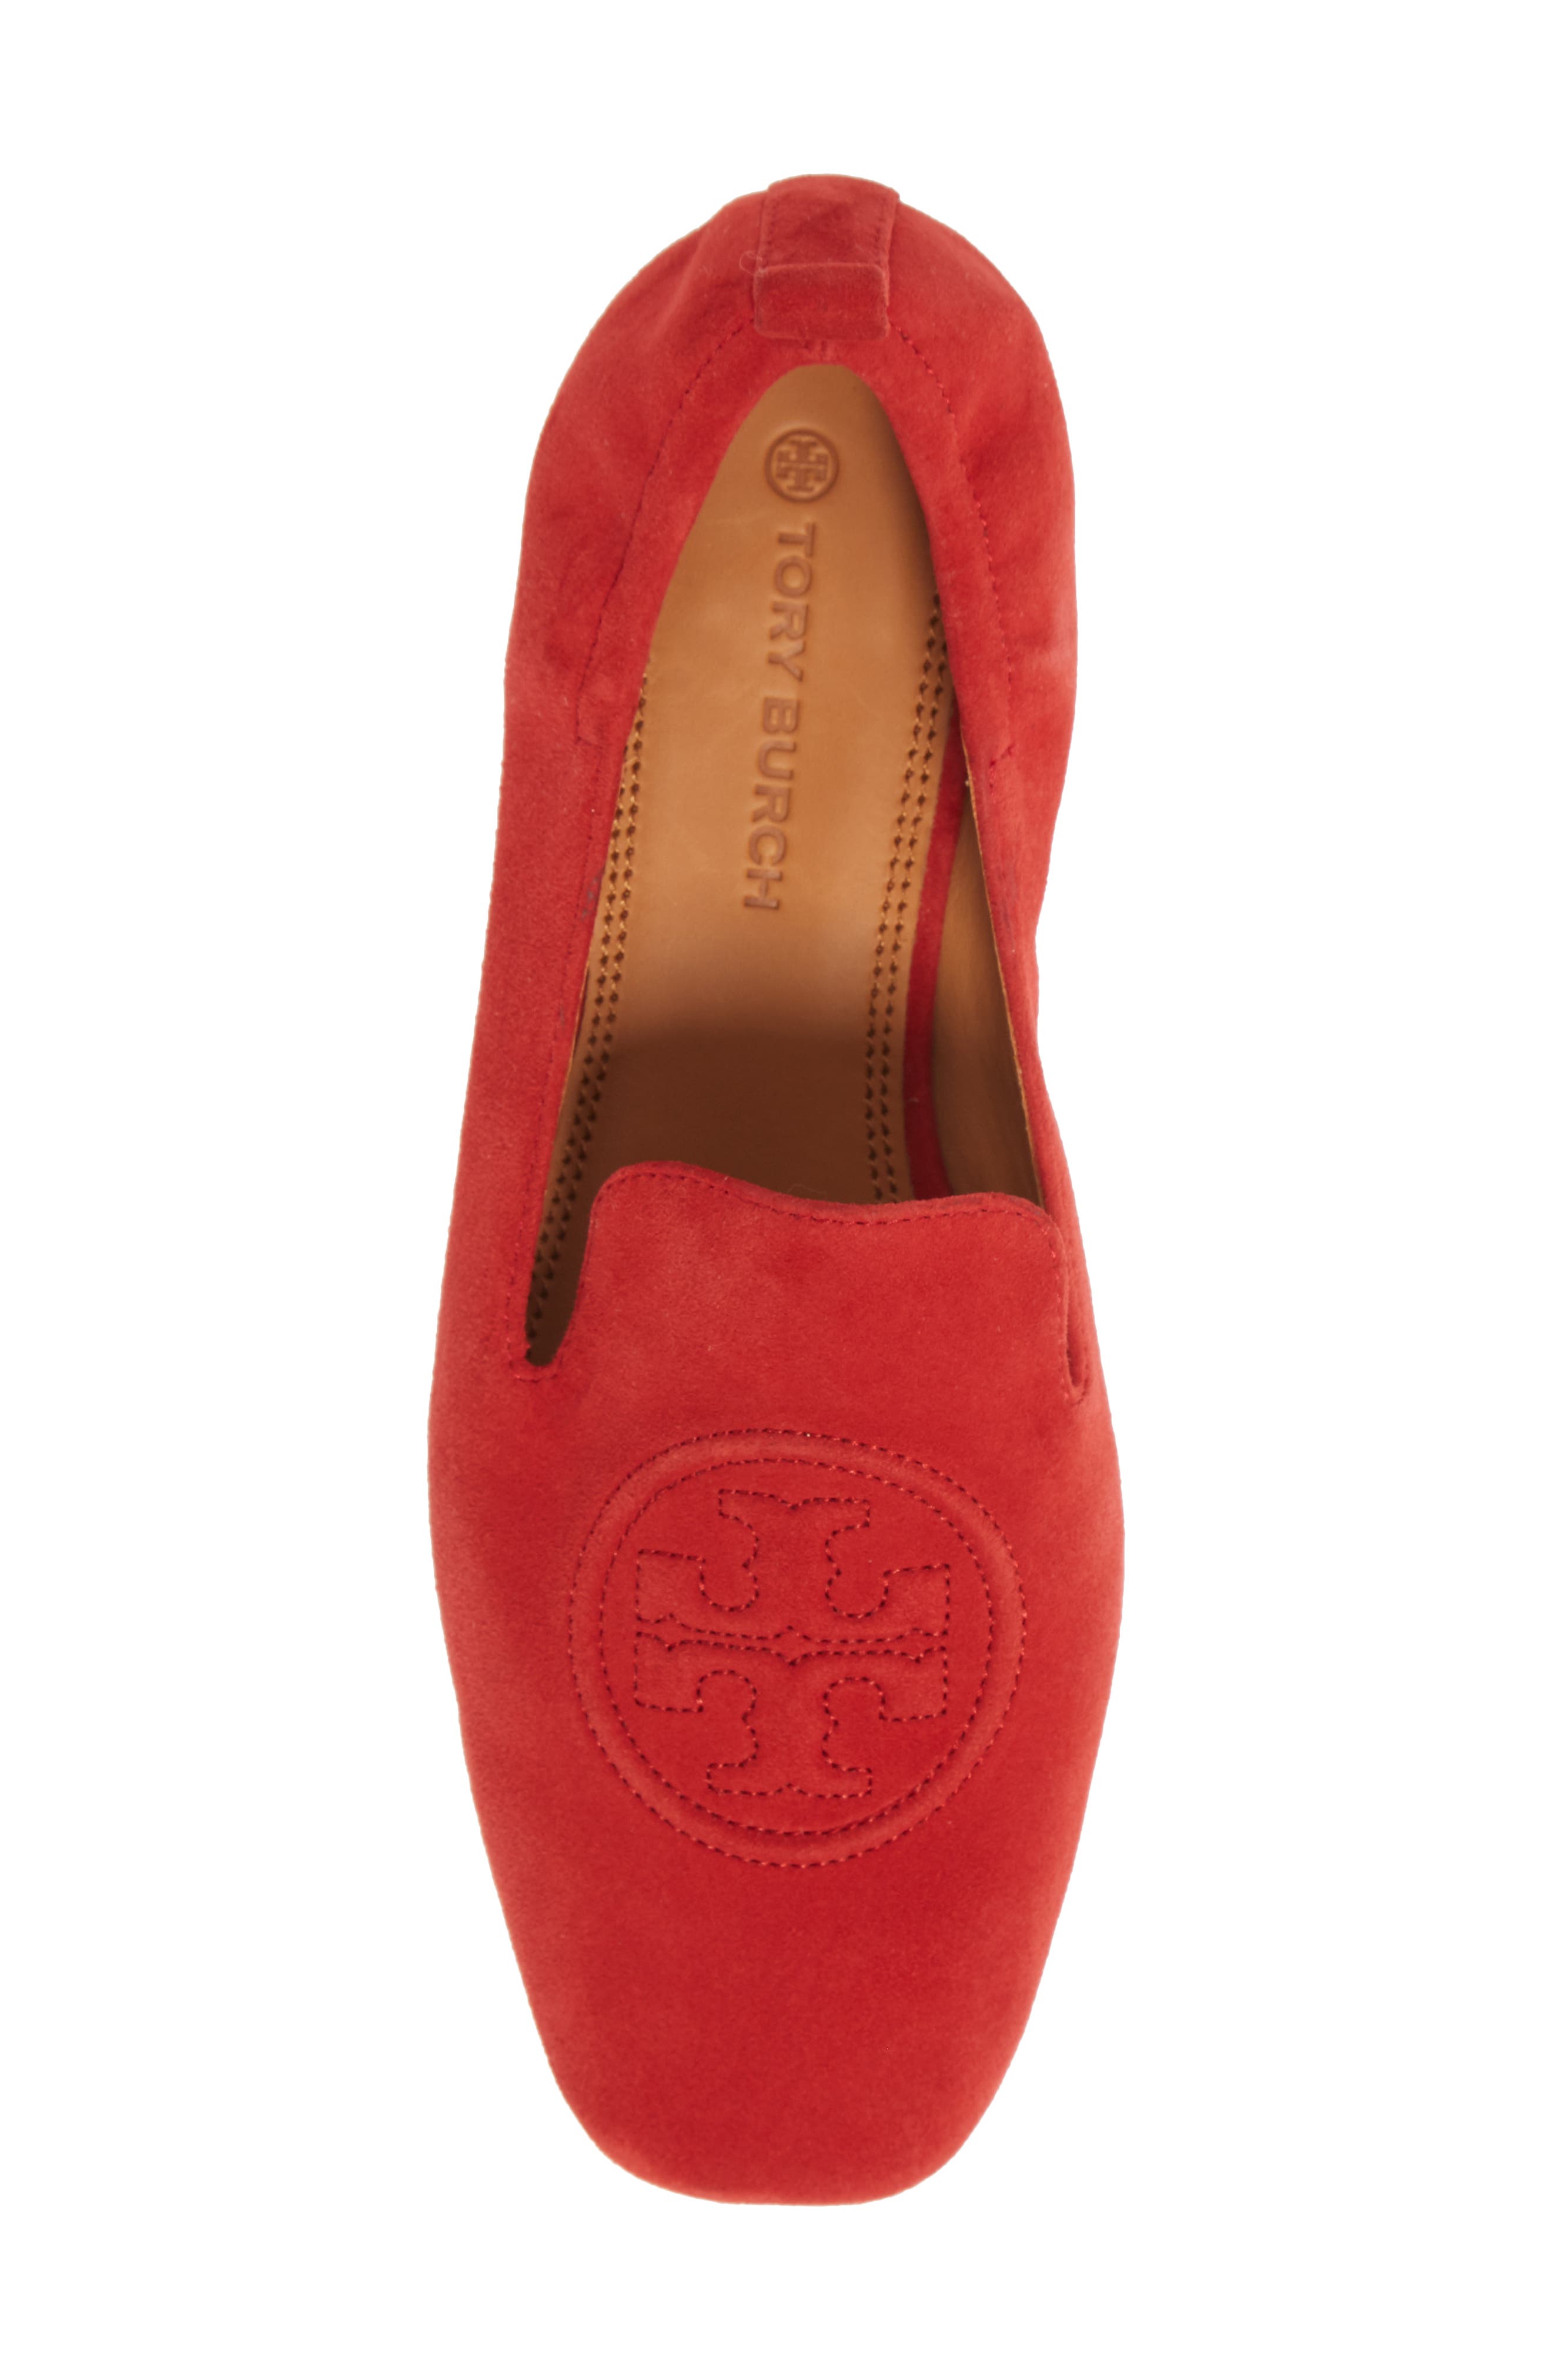 tory burch red loafers